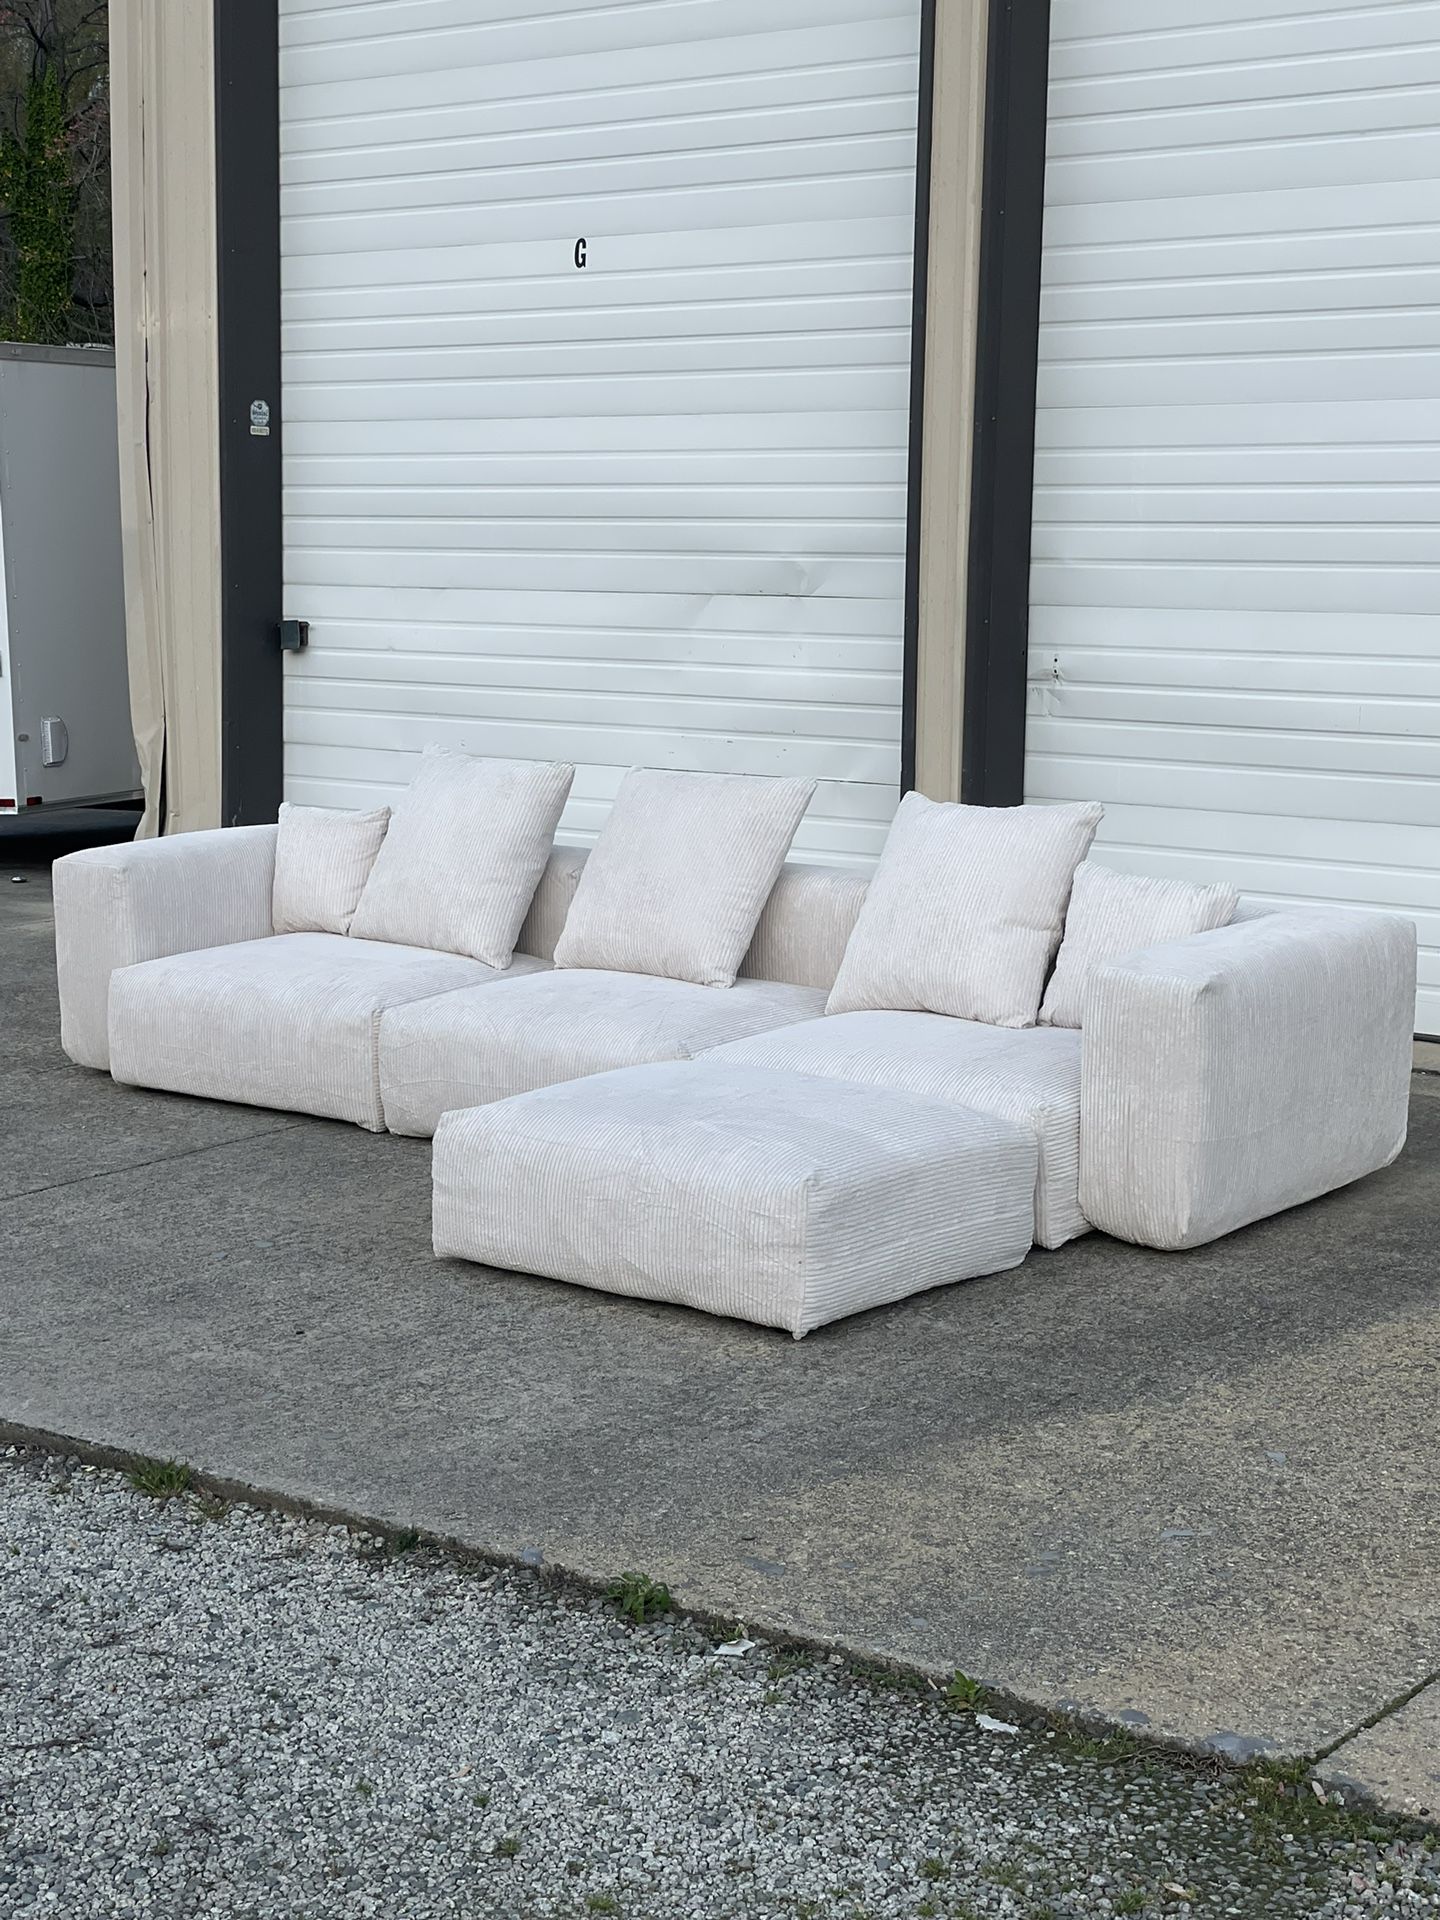 Giant Corduroy Modular Couch - Delivery and Financing available (Price $1295)